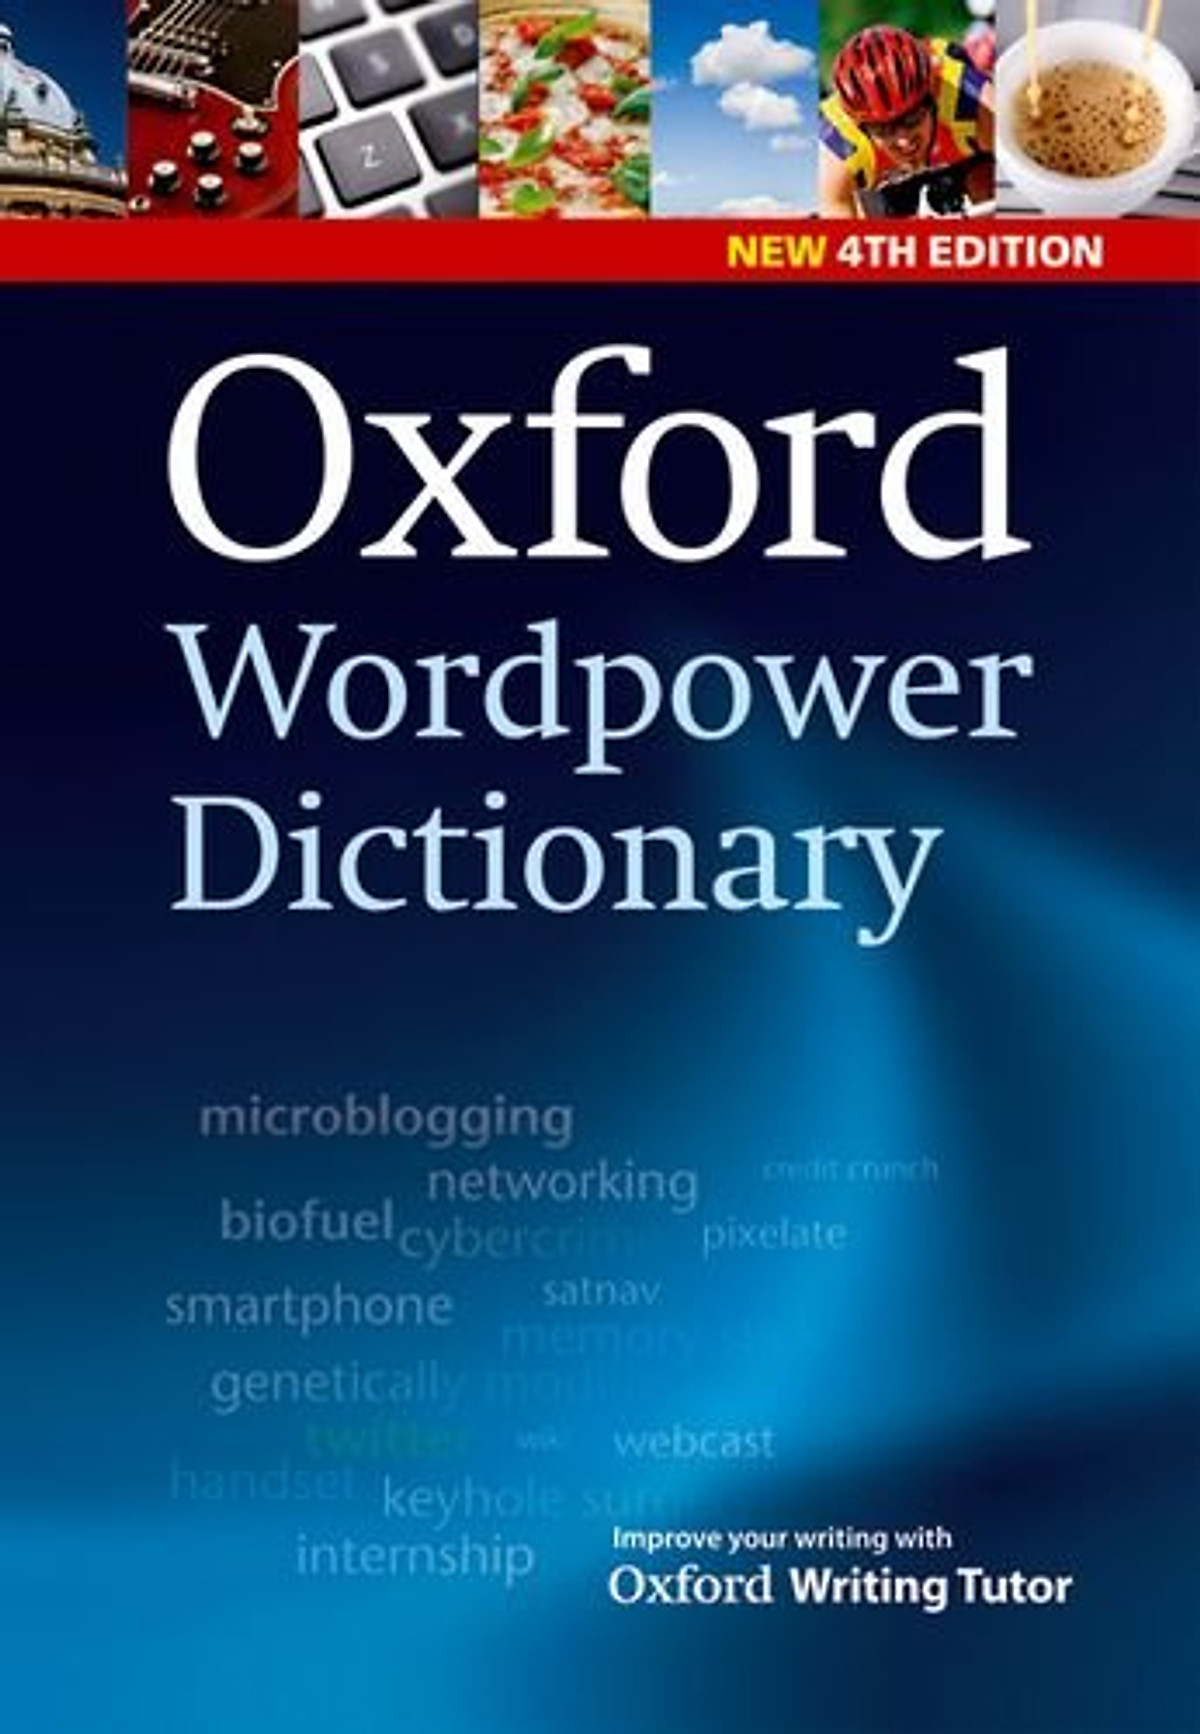 Oxford Wordpower Dictionary (4th Edition)